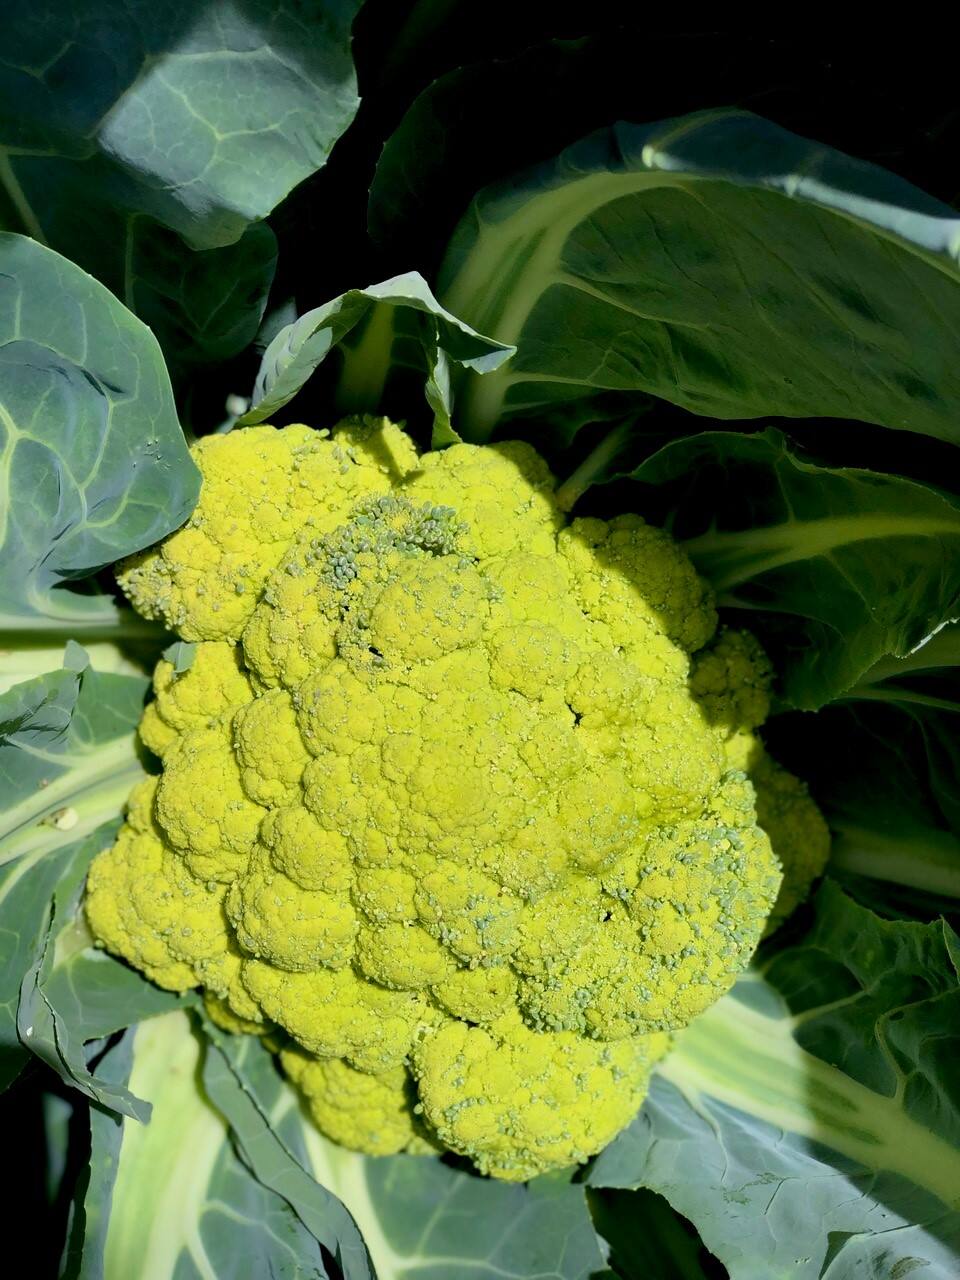 Among the favorites from Kate’s garden this year was this ’Green Macerata’ cauliflower that was both prolific and delicious. (Kate Frey)